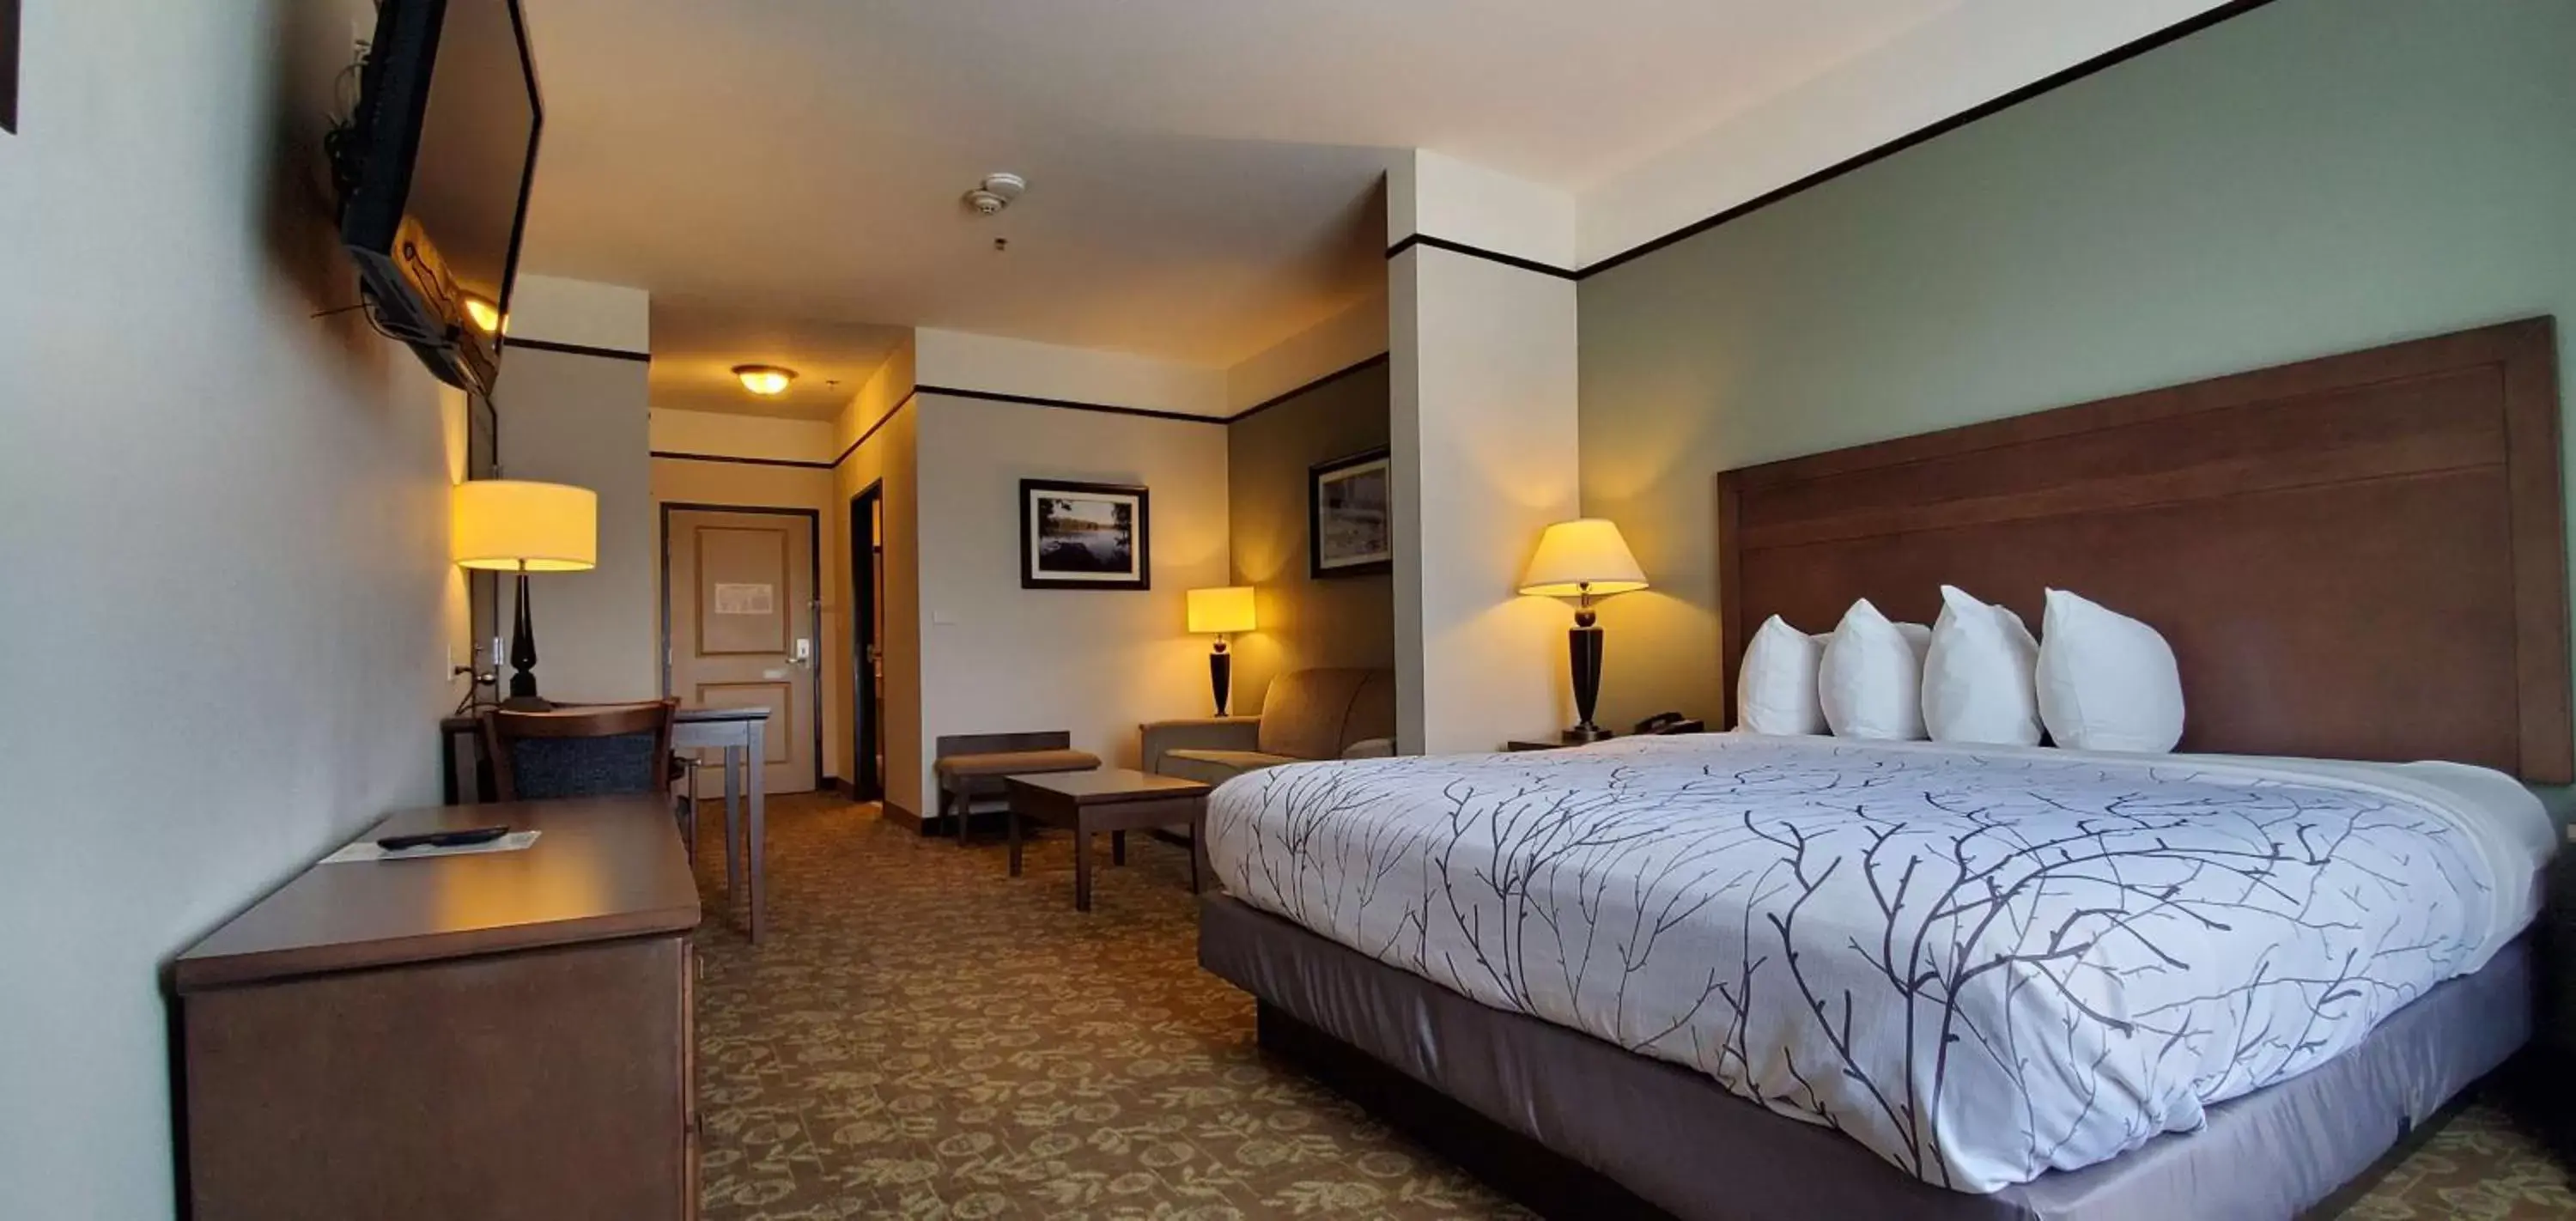 King Room with Jetted Tub - Non-Smoking in Best Western Plus Emory at Lake Fork Inn & Suites